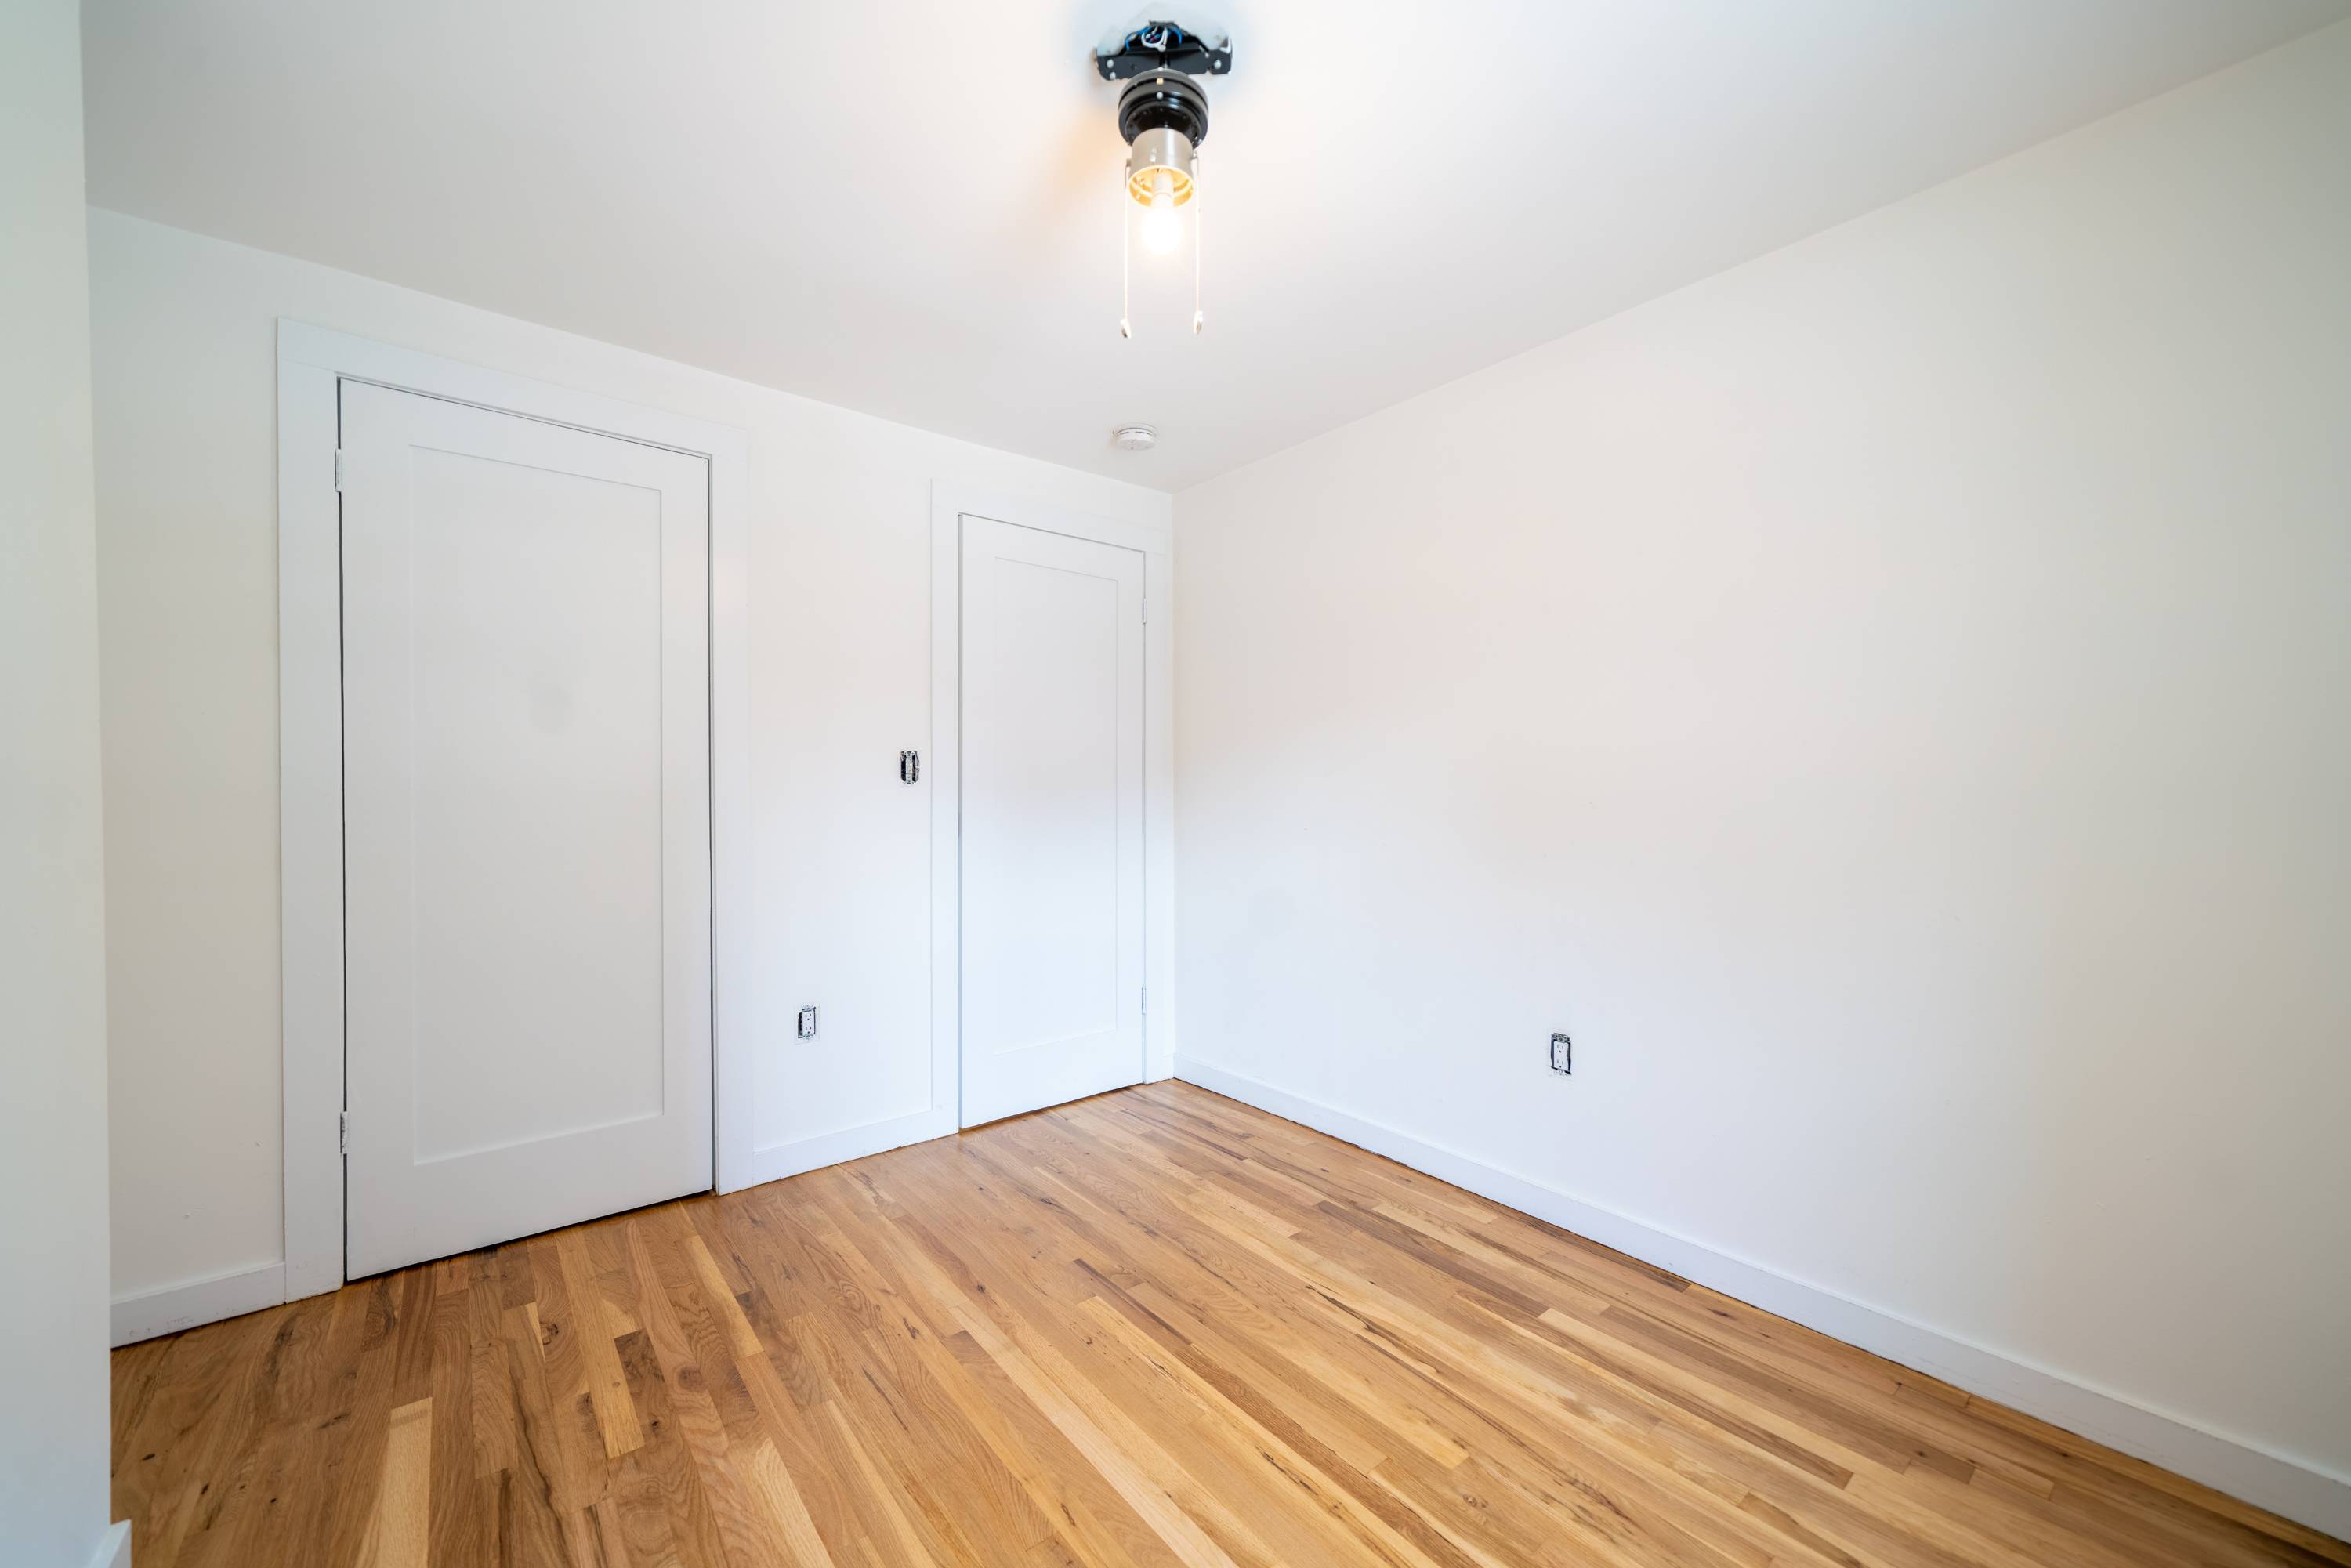 Newly Renovated 2 Bedroom 1 Bath Apartment located at 216 Jefferson Street!